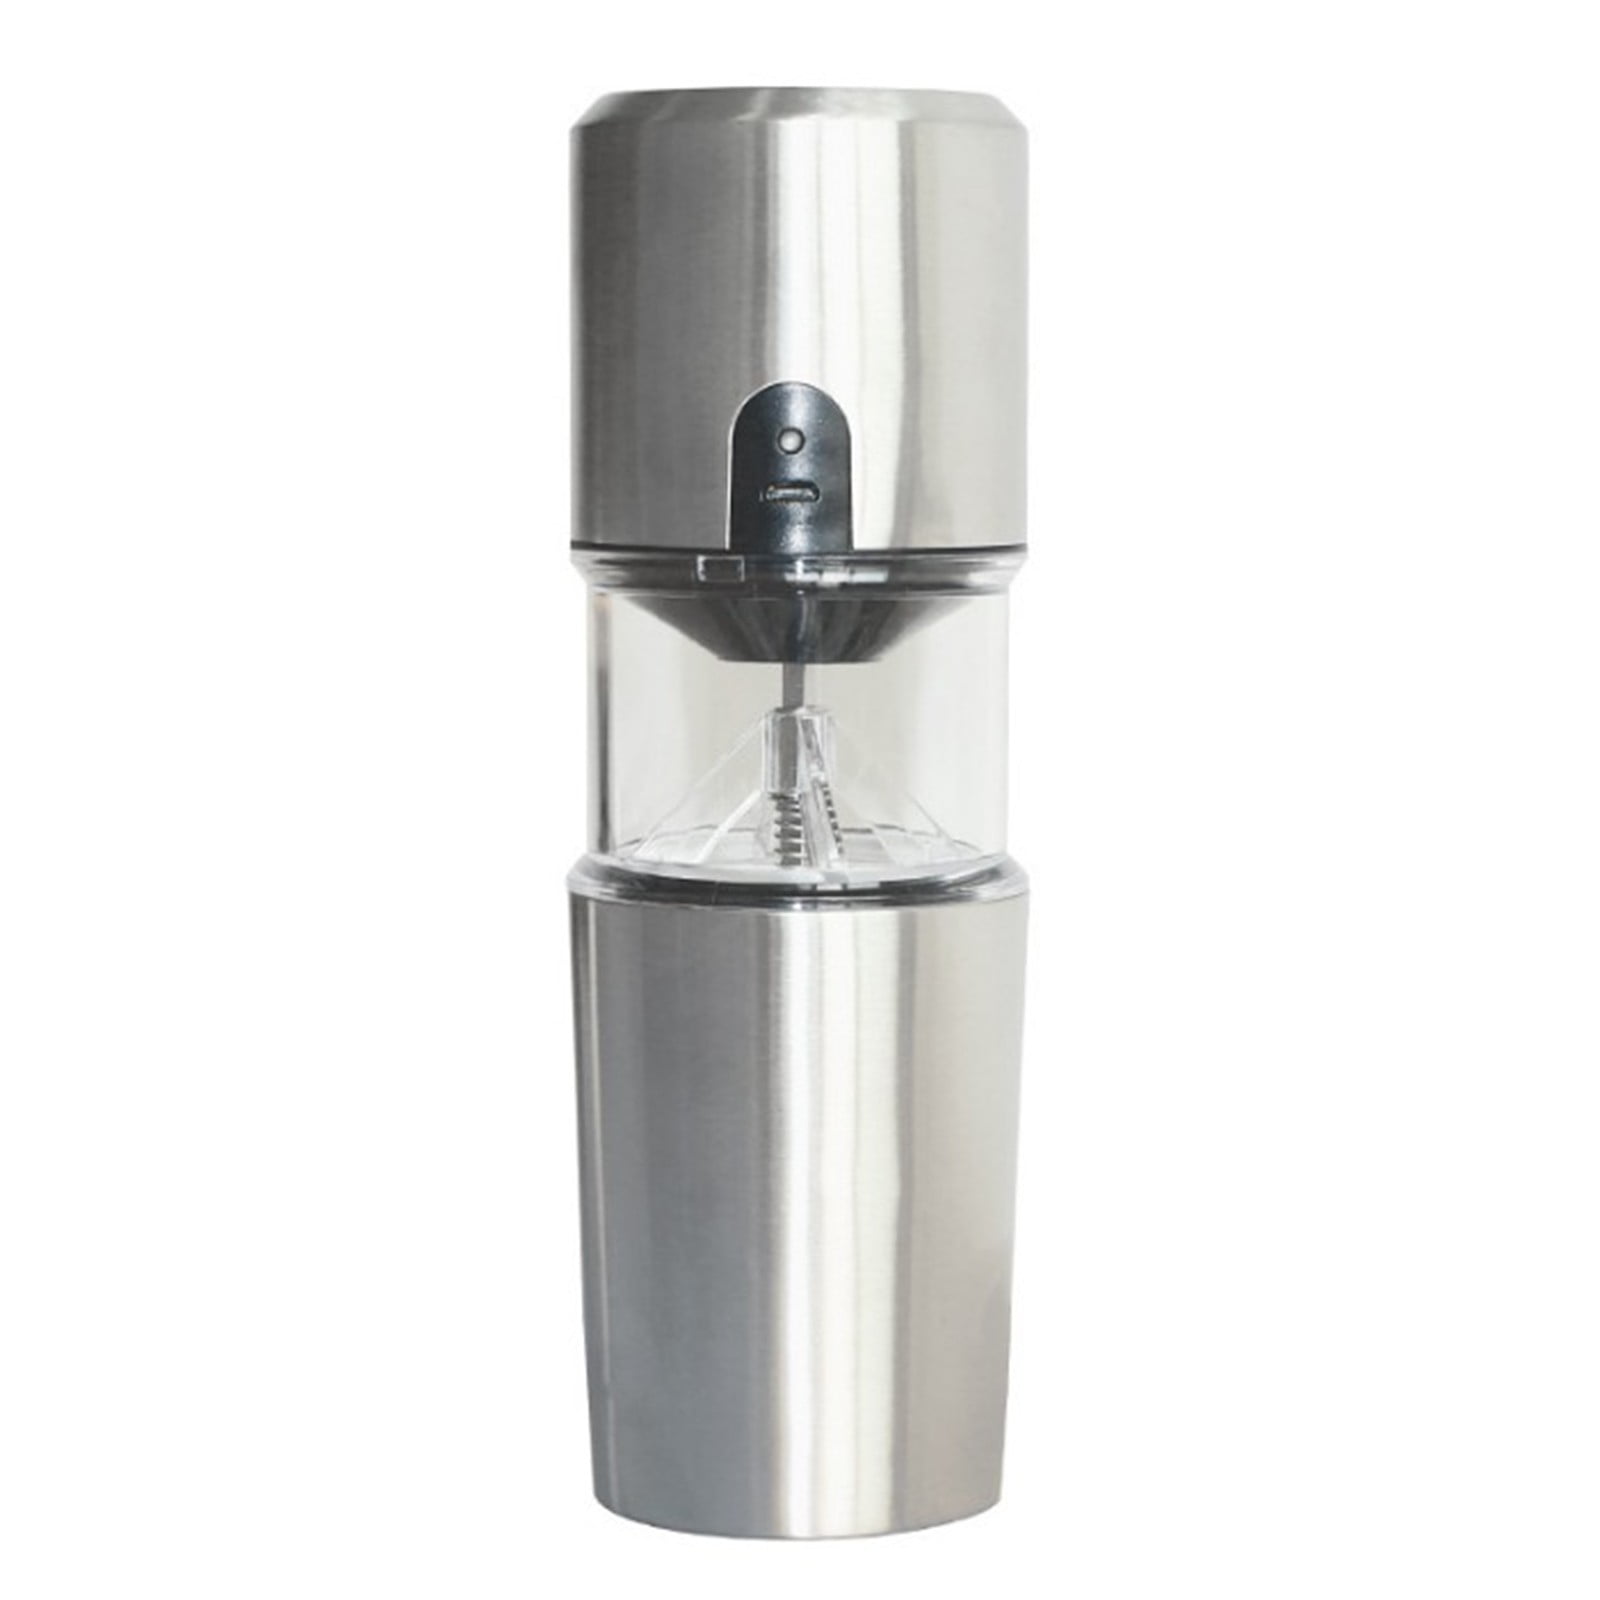 1pc 400g Large Capacity Electric Stainless Steel Coffee Grinder, Spice  Grinder For Coffee Espresso Latte, Gourmet Herbs, Spices, Nuts, Grains